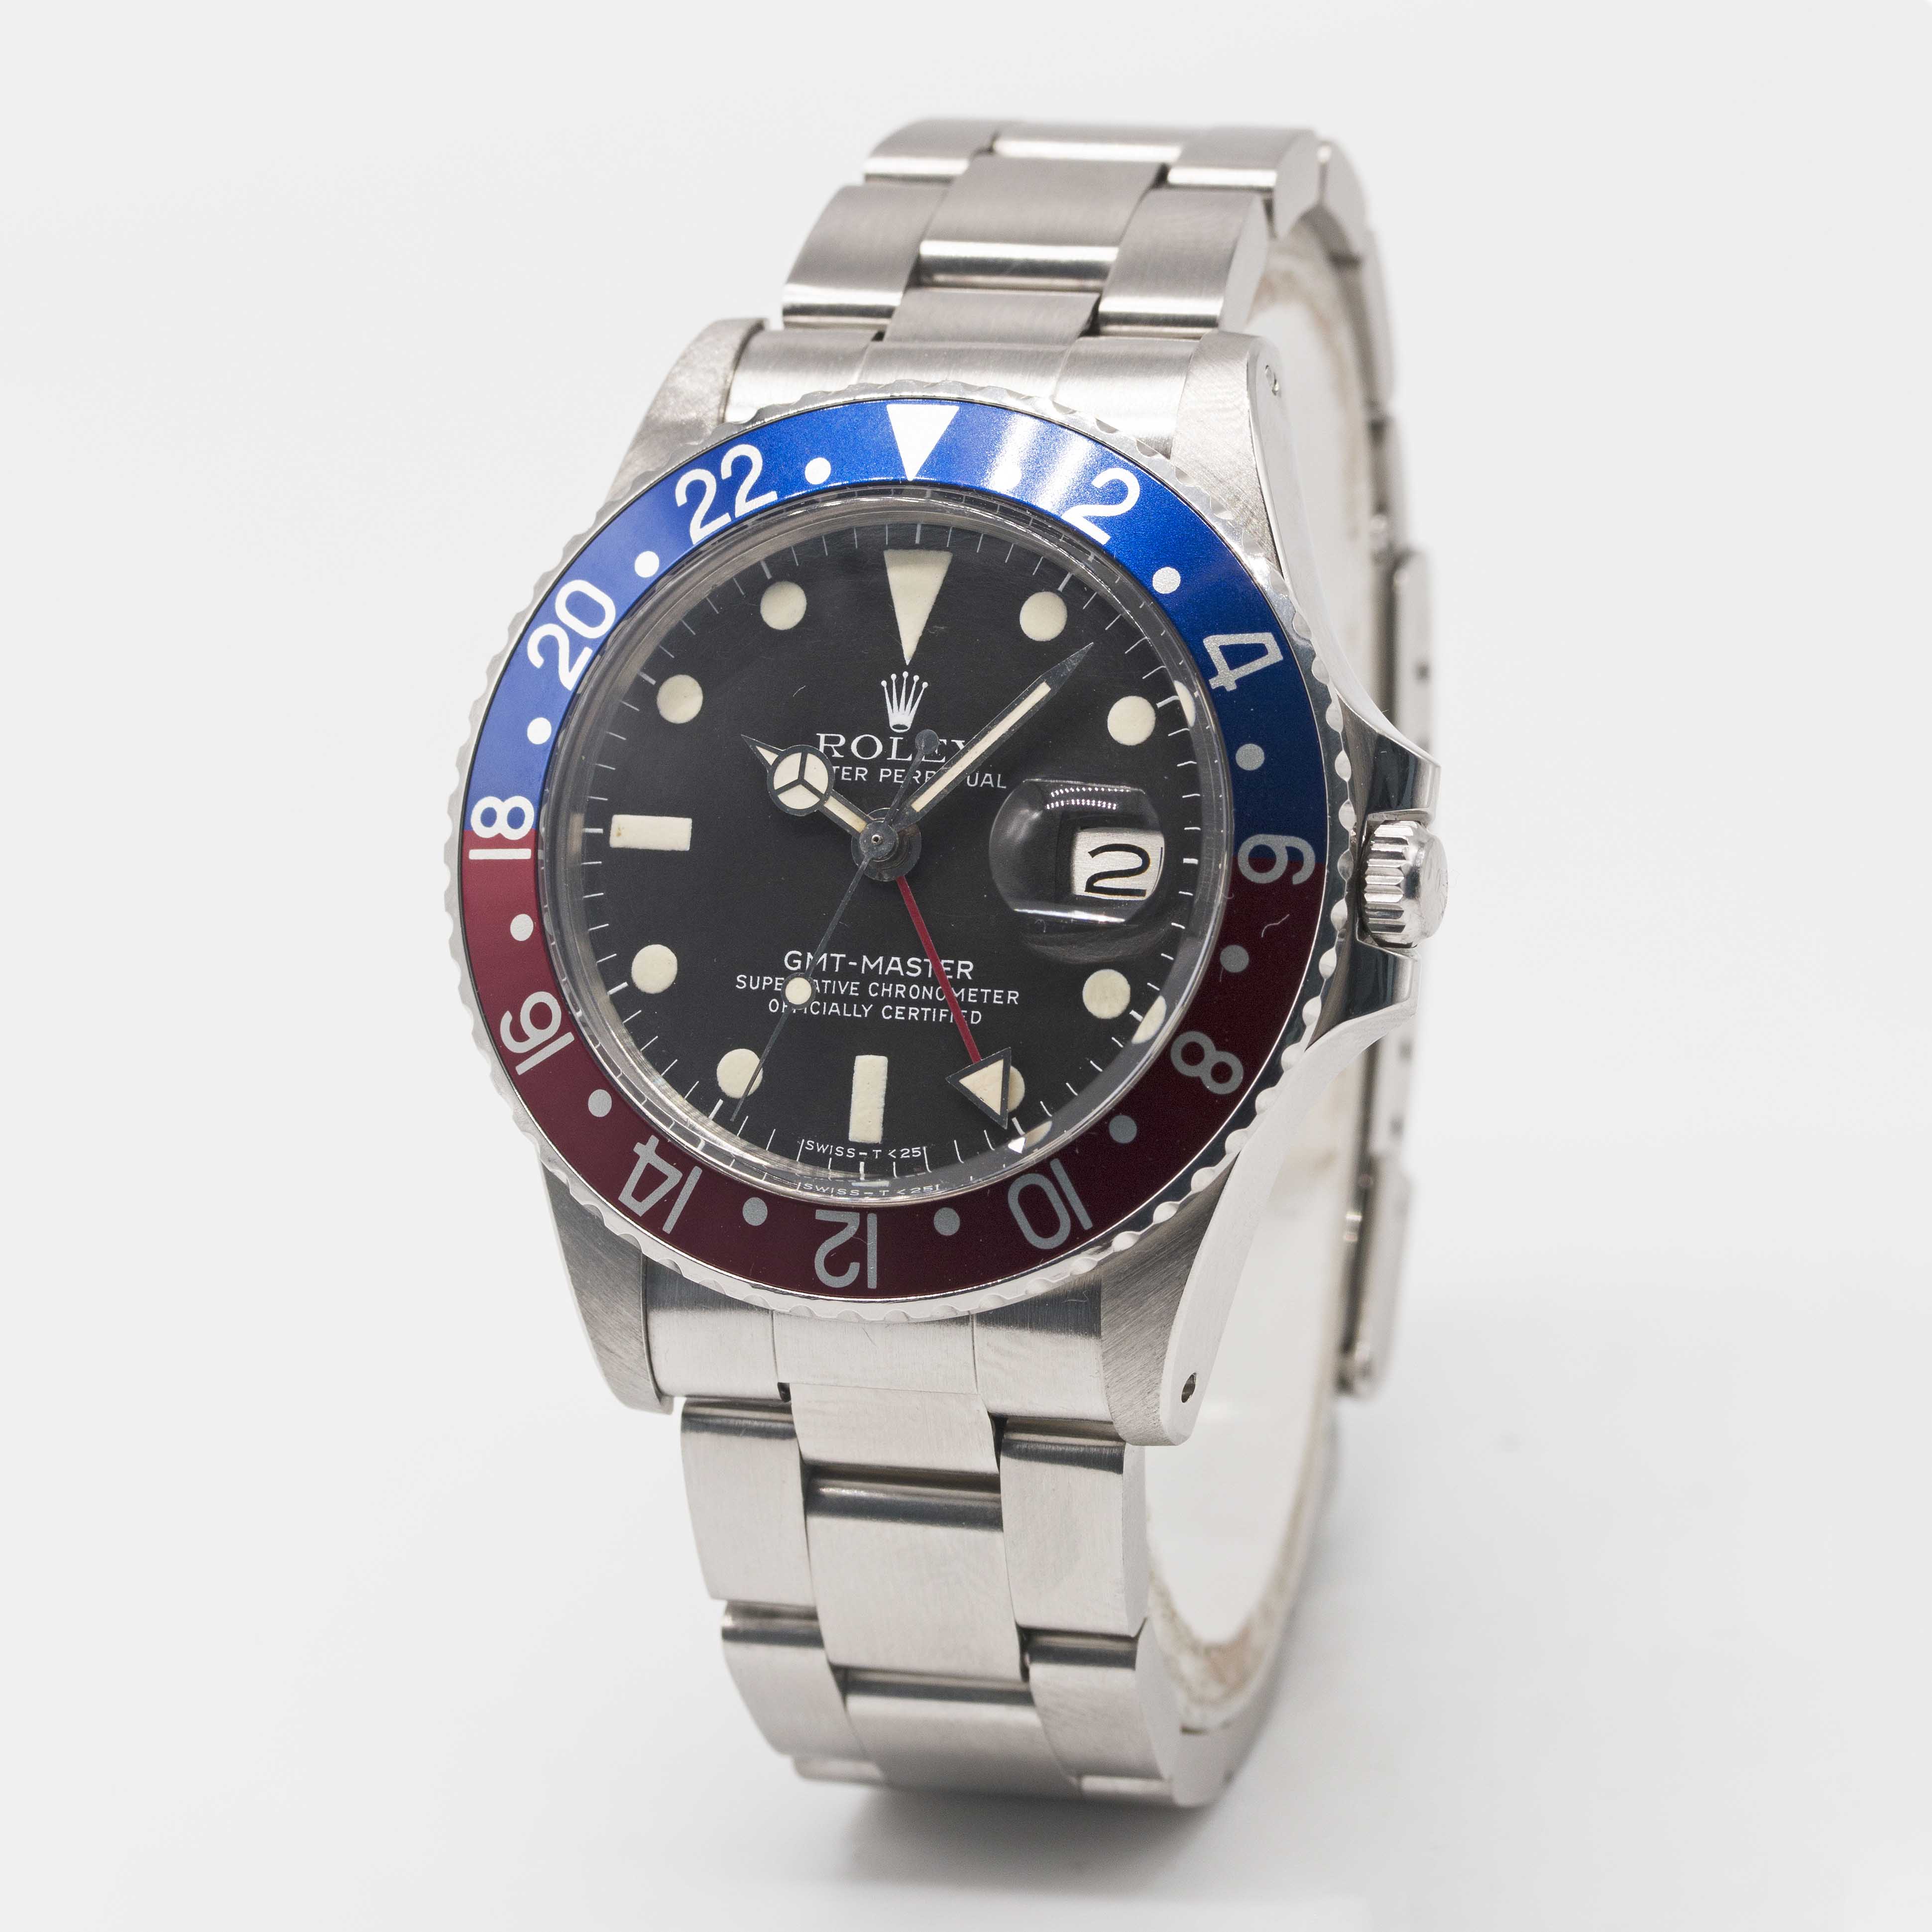 A GENTLEMAN'S STAINLESS STEEL ROLEX OYSTER PERPETUAL GMT MASTER BRACELET WATCH CIRCA 1978, REF. 1675 - Image 3 of 7